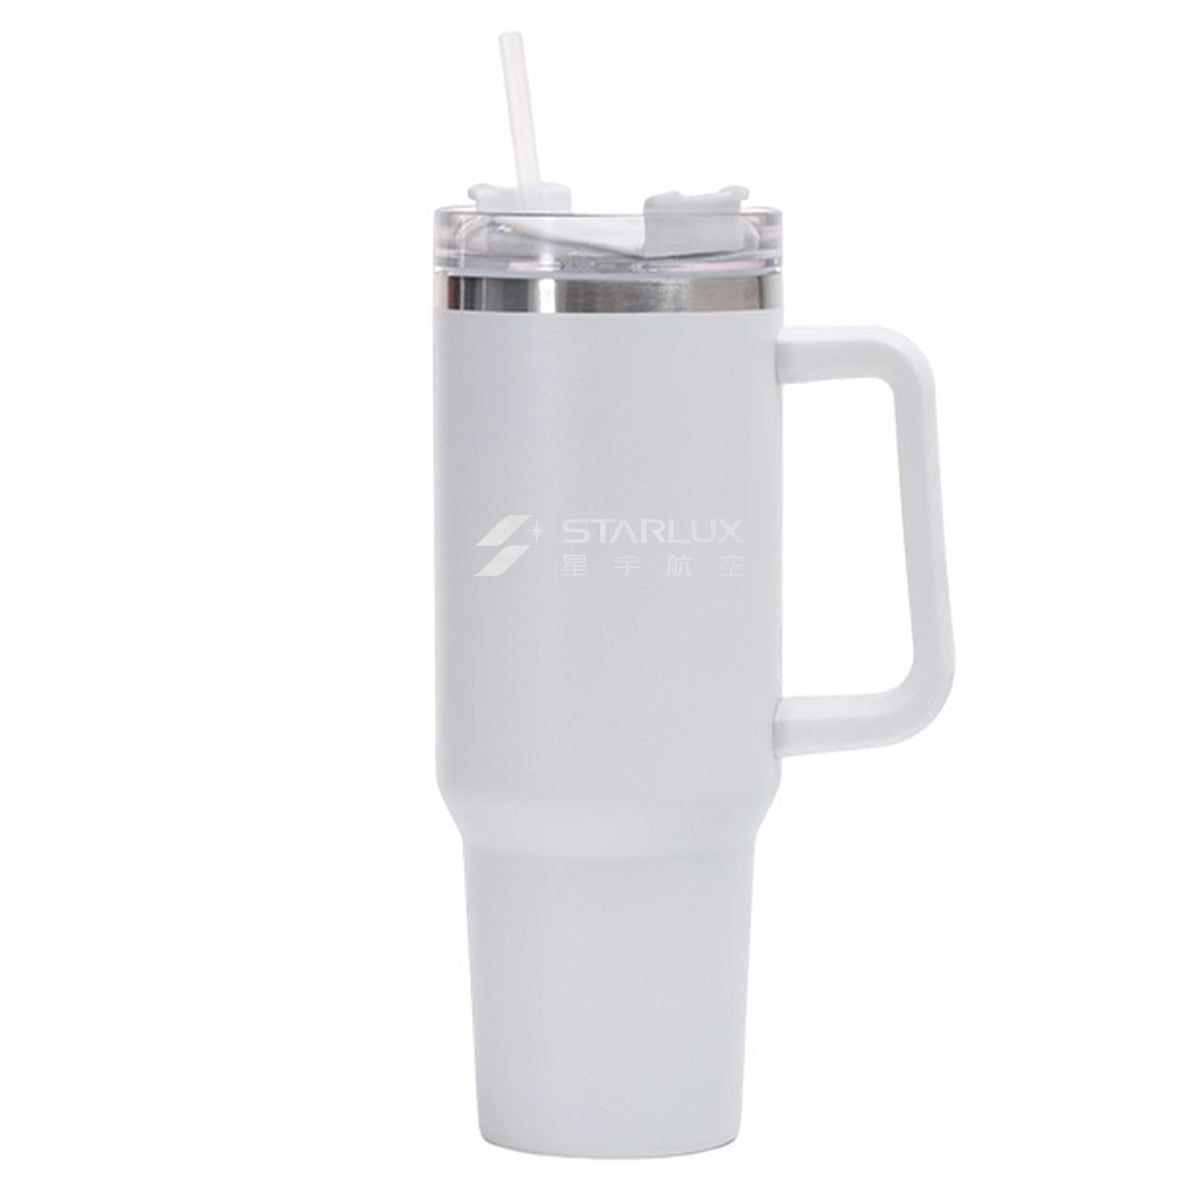 STARLUX Airlines Designed 40oz Stainless Steel Car Mug With Holder